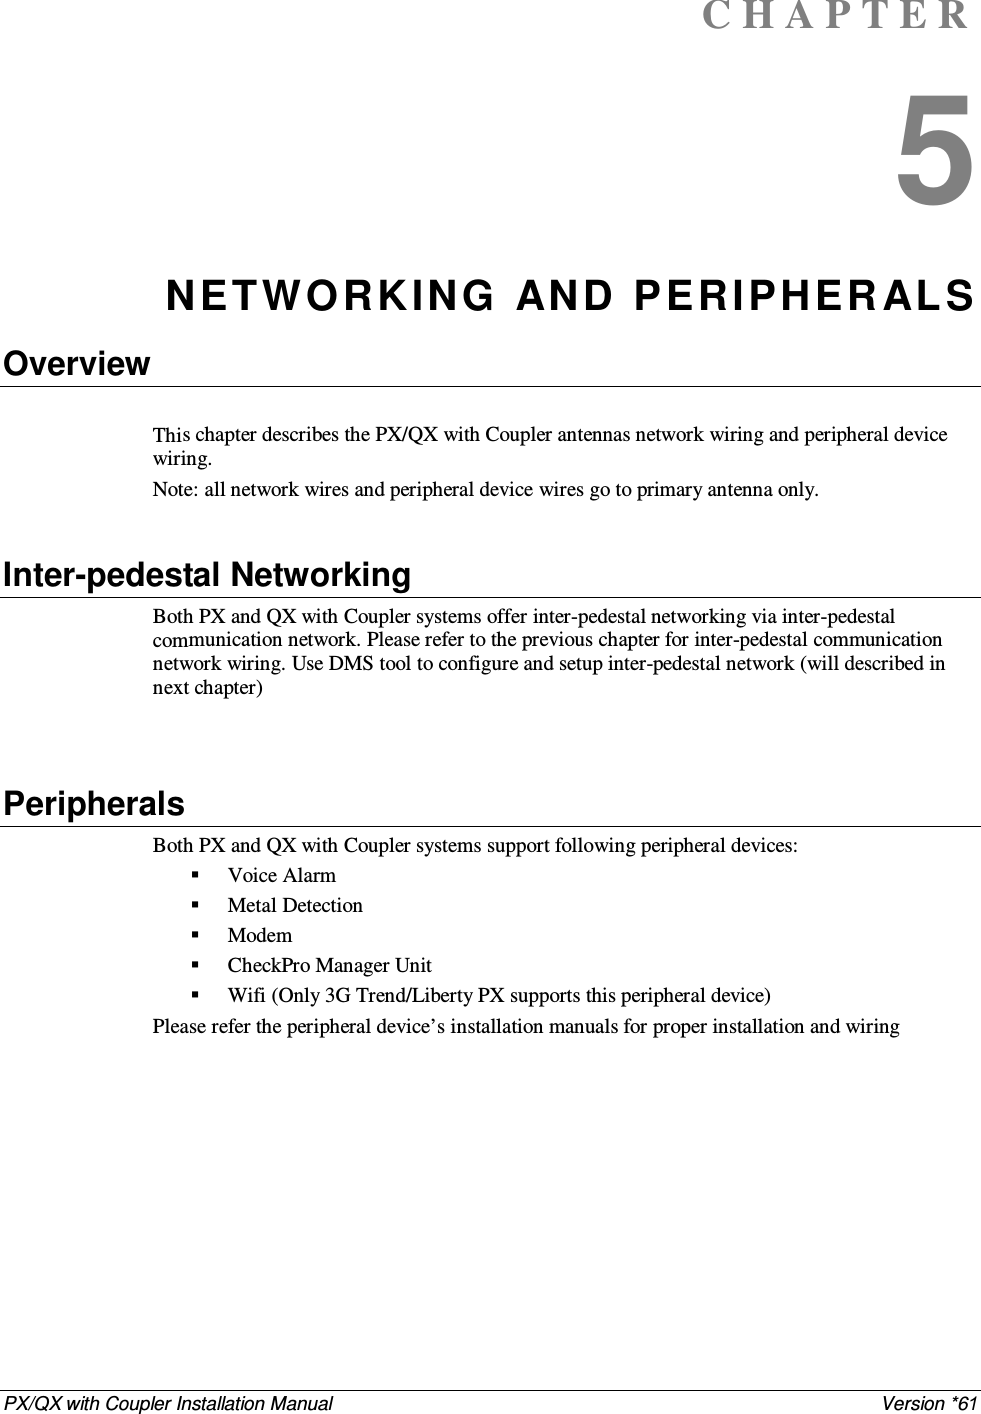 PX/QX with Coupler Installation Manual    Version *61 C H A P T E R  5 NETW O RKING  AND PERIPHER AL S Overview  This chapter describes the PX/QX with Coupler antennas network wiring and peripheral device wiring.  Note: all network wires and peripheral device wires go to primary antenna only.   Inter-pedestal Networking Both PX and QX with Coupler systems offer inter-pedestal networking via inter-pedestal communication network. Please refer to the previous chapter for inter-pedestal communication network wiring. Use DMS tool to configure and setup inter-pedestal network (will described in next chapter)   Peripherals Both PX and QX with Coupler systems support following peripheral devices:  Voice Alarm  Metal Detection  Modem  CheckPro Manager Unit  Wifi (Only 3G Trend/Liberty PX supports this peripheral device) Please refer the peripheral device’s installation manuals for proper installation and wiring 